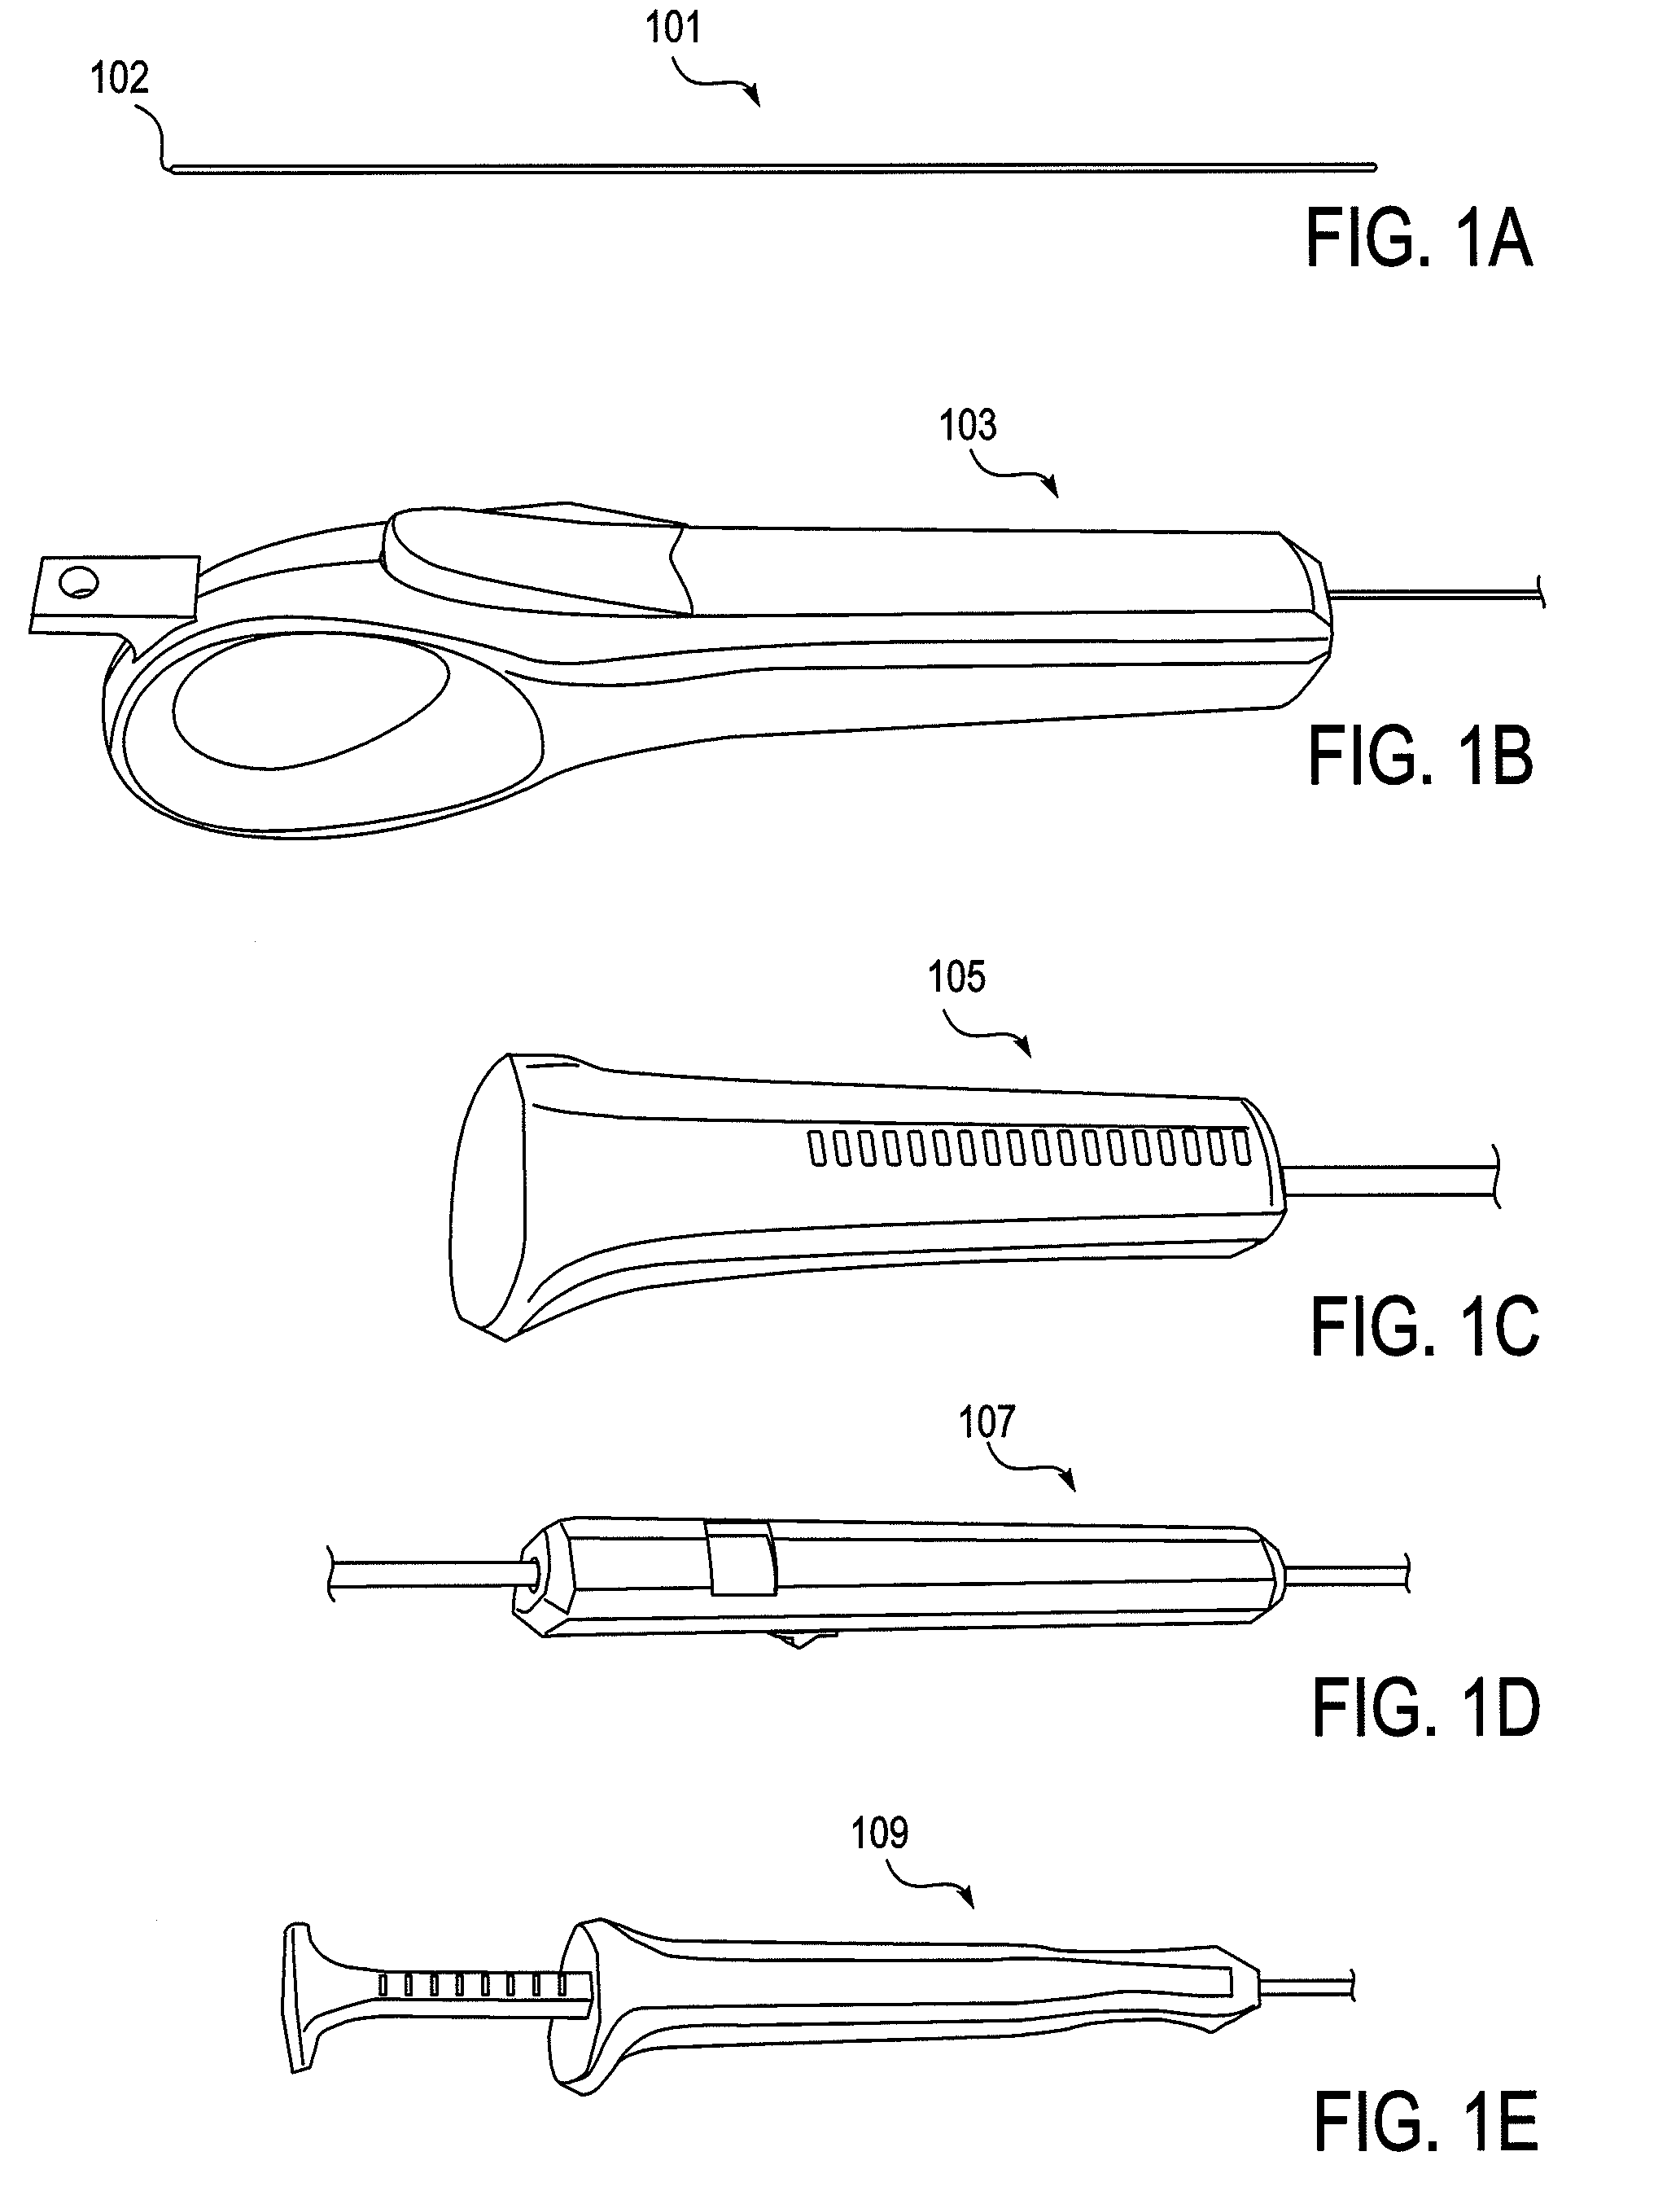 Surgical tools for treatment of spinal stenosis